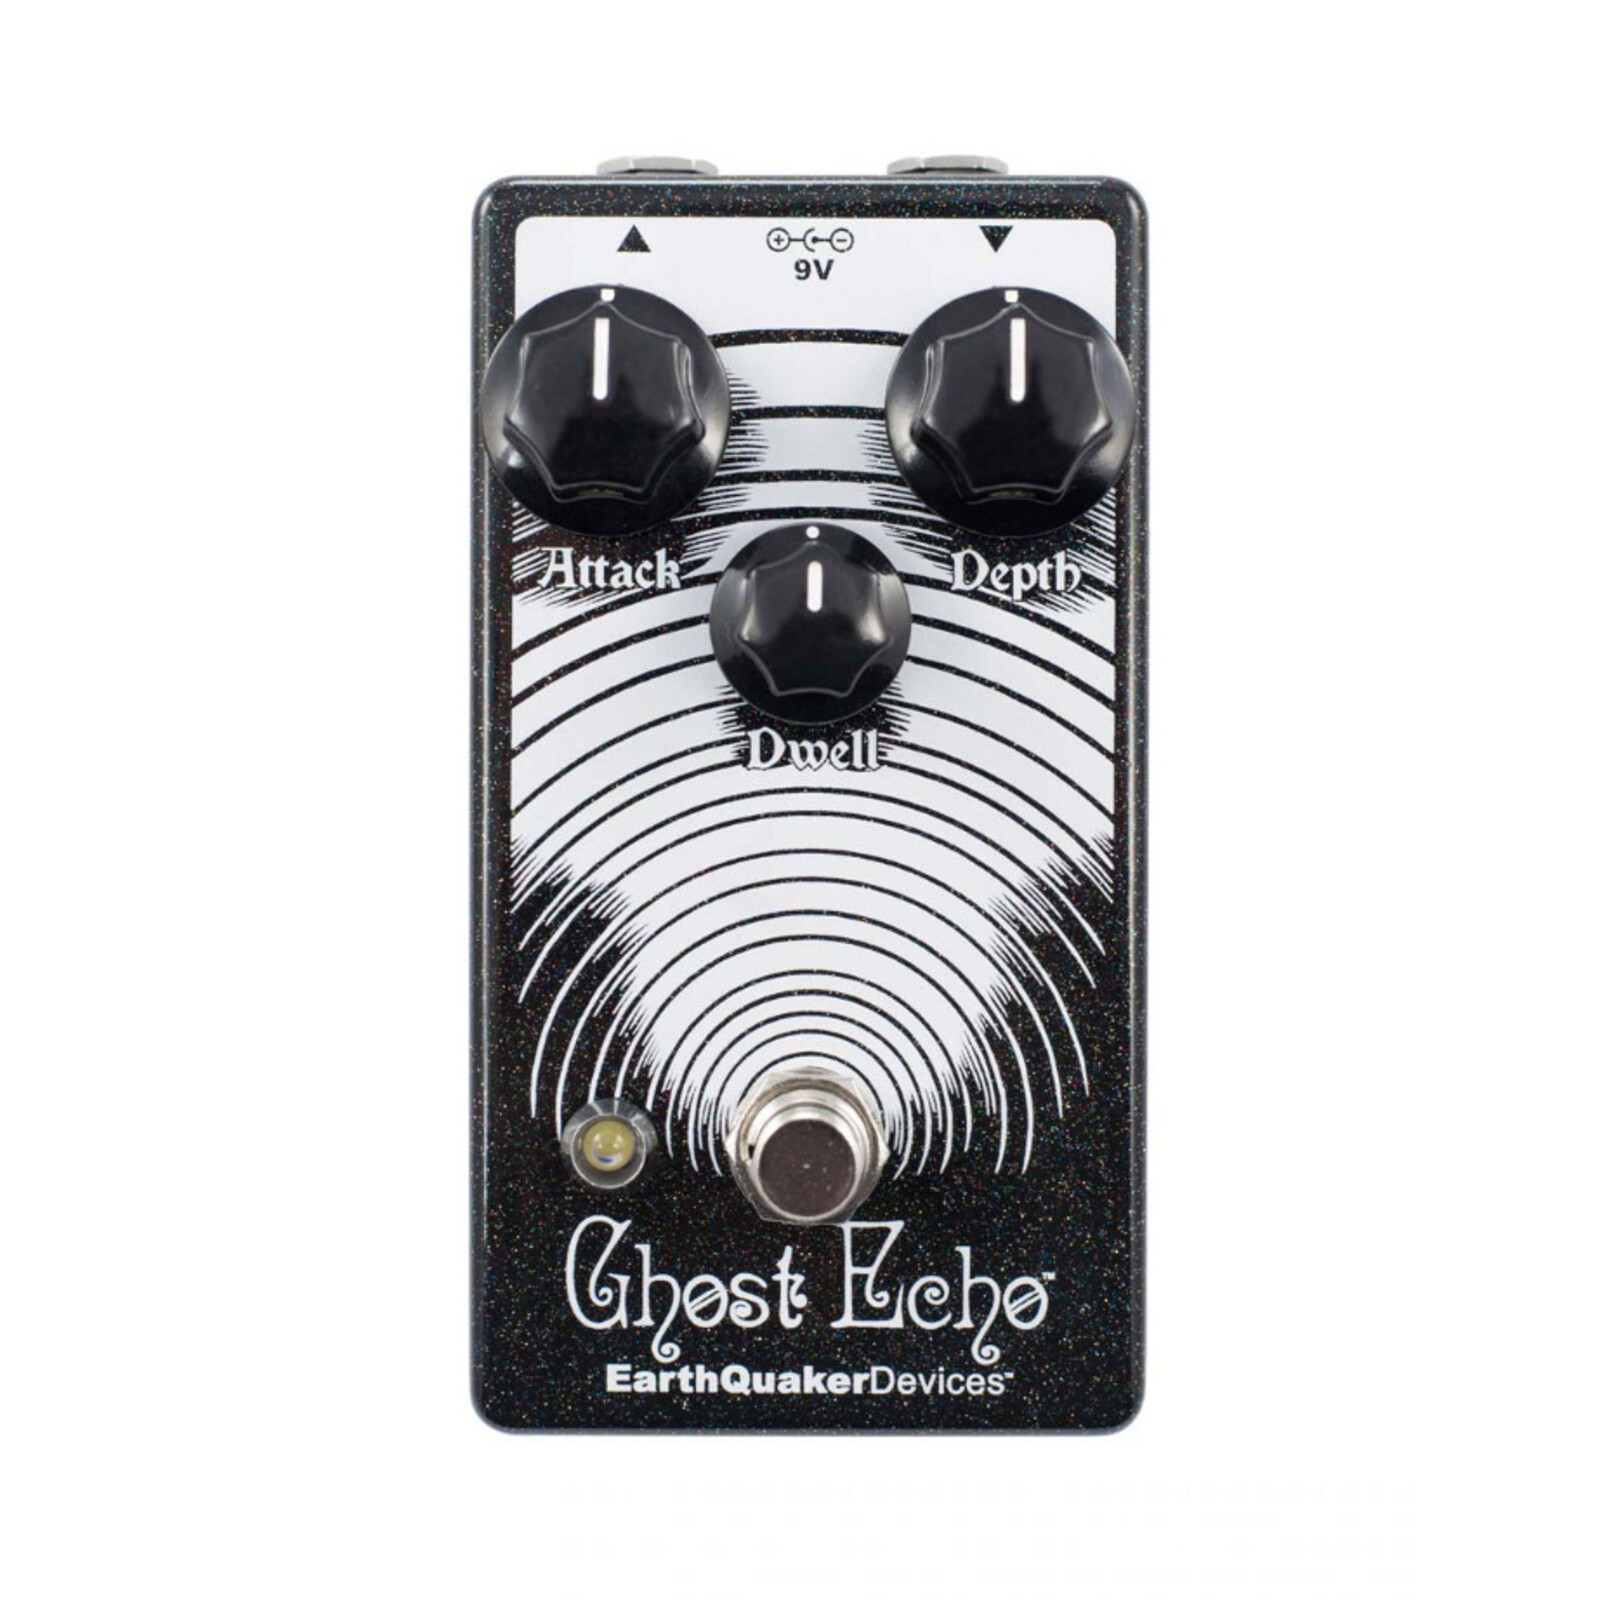 Earthquaker Devices Earthquaker Devices Ghost echo